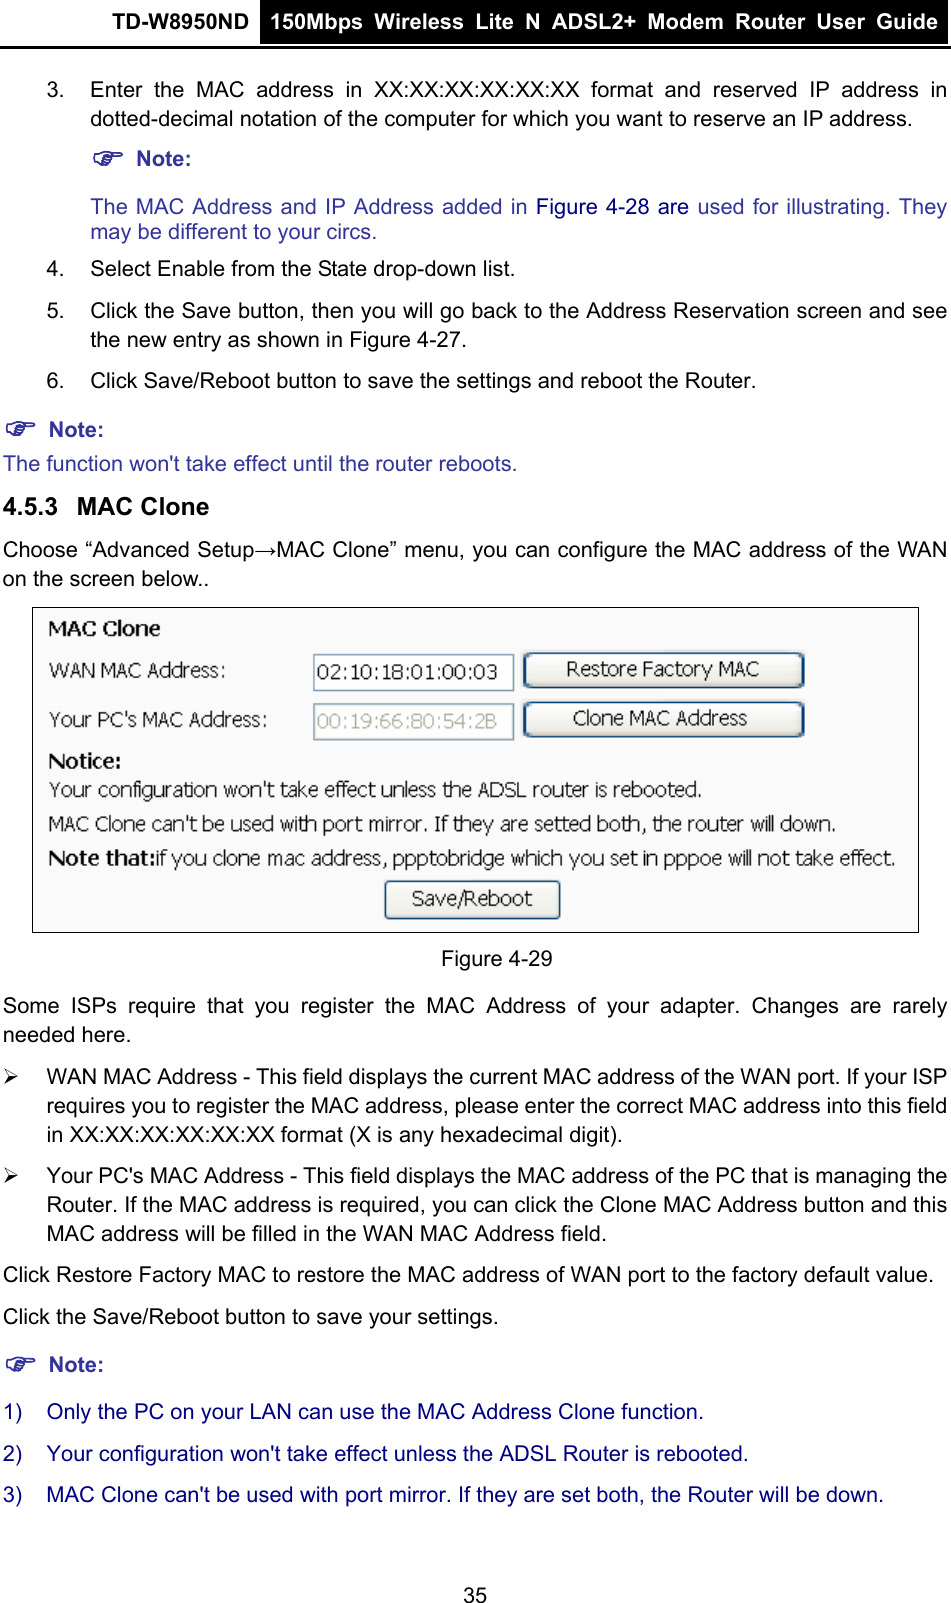 TD-W8950ND  150Mbps Wireless Lite N ADSL2+ Modem Router User Guide  3.  Enter the MAC address in XX:XX:XX:XX:XX:XX format and reserved IP address in dotted-decimal notation of the computer for which you want to reserve an IP address.   ) Note: The MAC Address and IP Address added in Figure 4-28 are used for illustrating. They may be different to your circs. 4.  Select Enable from the State drop-down list.   5.  Click the Save button, then you will go back to the Address Reservation screen and see the new entry as shown in Figure 4-27. 6.  Click Save/Reboot button to save the settings and reboot the Router. ) Note: The function won&apos;t take effect until the router reboots. 4.5.3  MAC Clone Choose “Advanced Setup→MAC Clone” menu, you can configure the MAC address of the WAN on the screen below..  Figure 4-29 Some ISPs require that you register the MAC Address of your adapter. Changes are rarely needed here. ¾  WAN MAC Address - This field displays the current MAC address of the WAN port. If your ISP requires you to register the MAC address, please enter the correct MAC address into this field in XX:XX:XX:XX:XX:XX format (X is any hexadecimal digit).   ¾  Your PC&apos;s MAC Address - This field displays the MAC address of the PC that is managing the Router. If the MAC address is required, you can click the Clone MAC Address button and this MAC address will be filled in the WAN MAC Address field. Click Restore Factory MAC to restore the MAC address of WAN port to the factory default value. Click the Save/Reboot button to save your settings. ) Note:  1)  Only the PC on your LAN can use the MAC Address Clone function. 2)  Your configuration won&apos;t take effect unless the ADSL Router is rebooted. 3)  MAC Clone can&apos;t be used with port mirror. If they are set both, the Router will be down. 35 